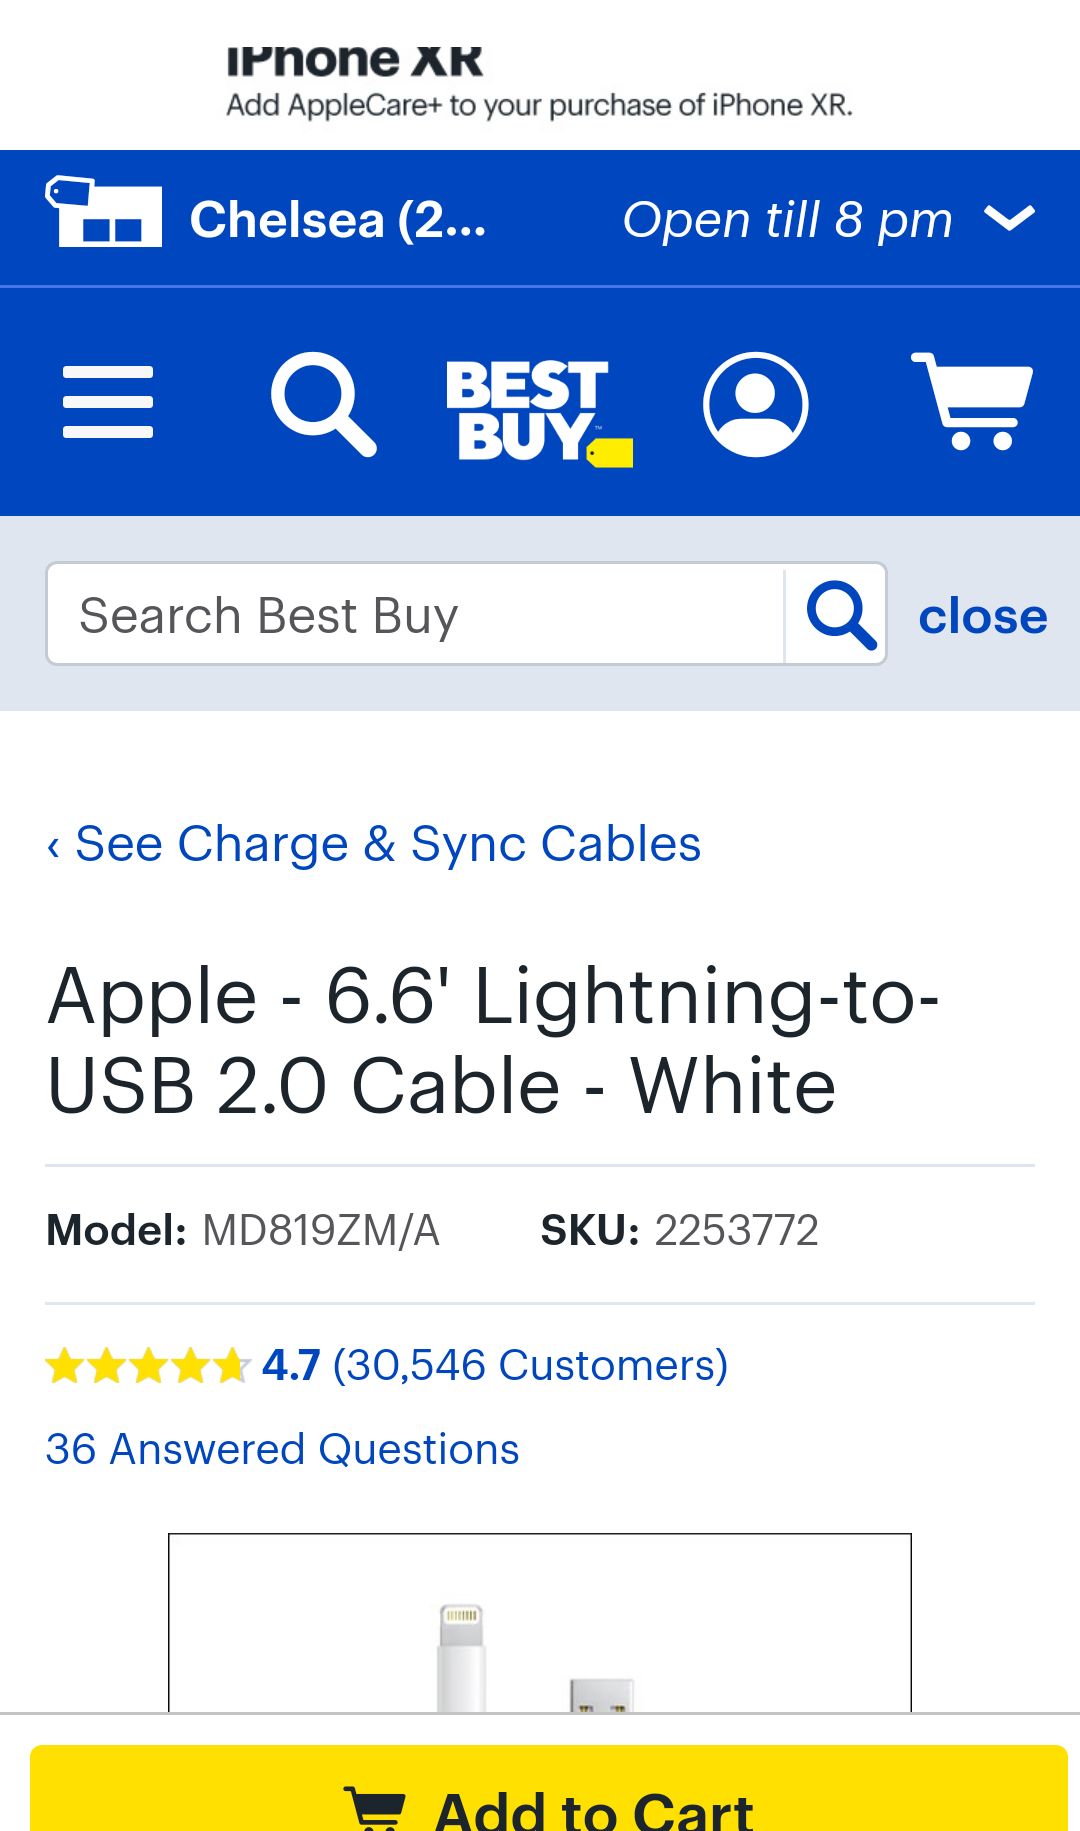 Apple 6.6' Lightning-to-USB 2.0 Cable White MD819ZM/A - Best Buy
苹果2米数据线